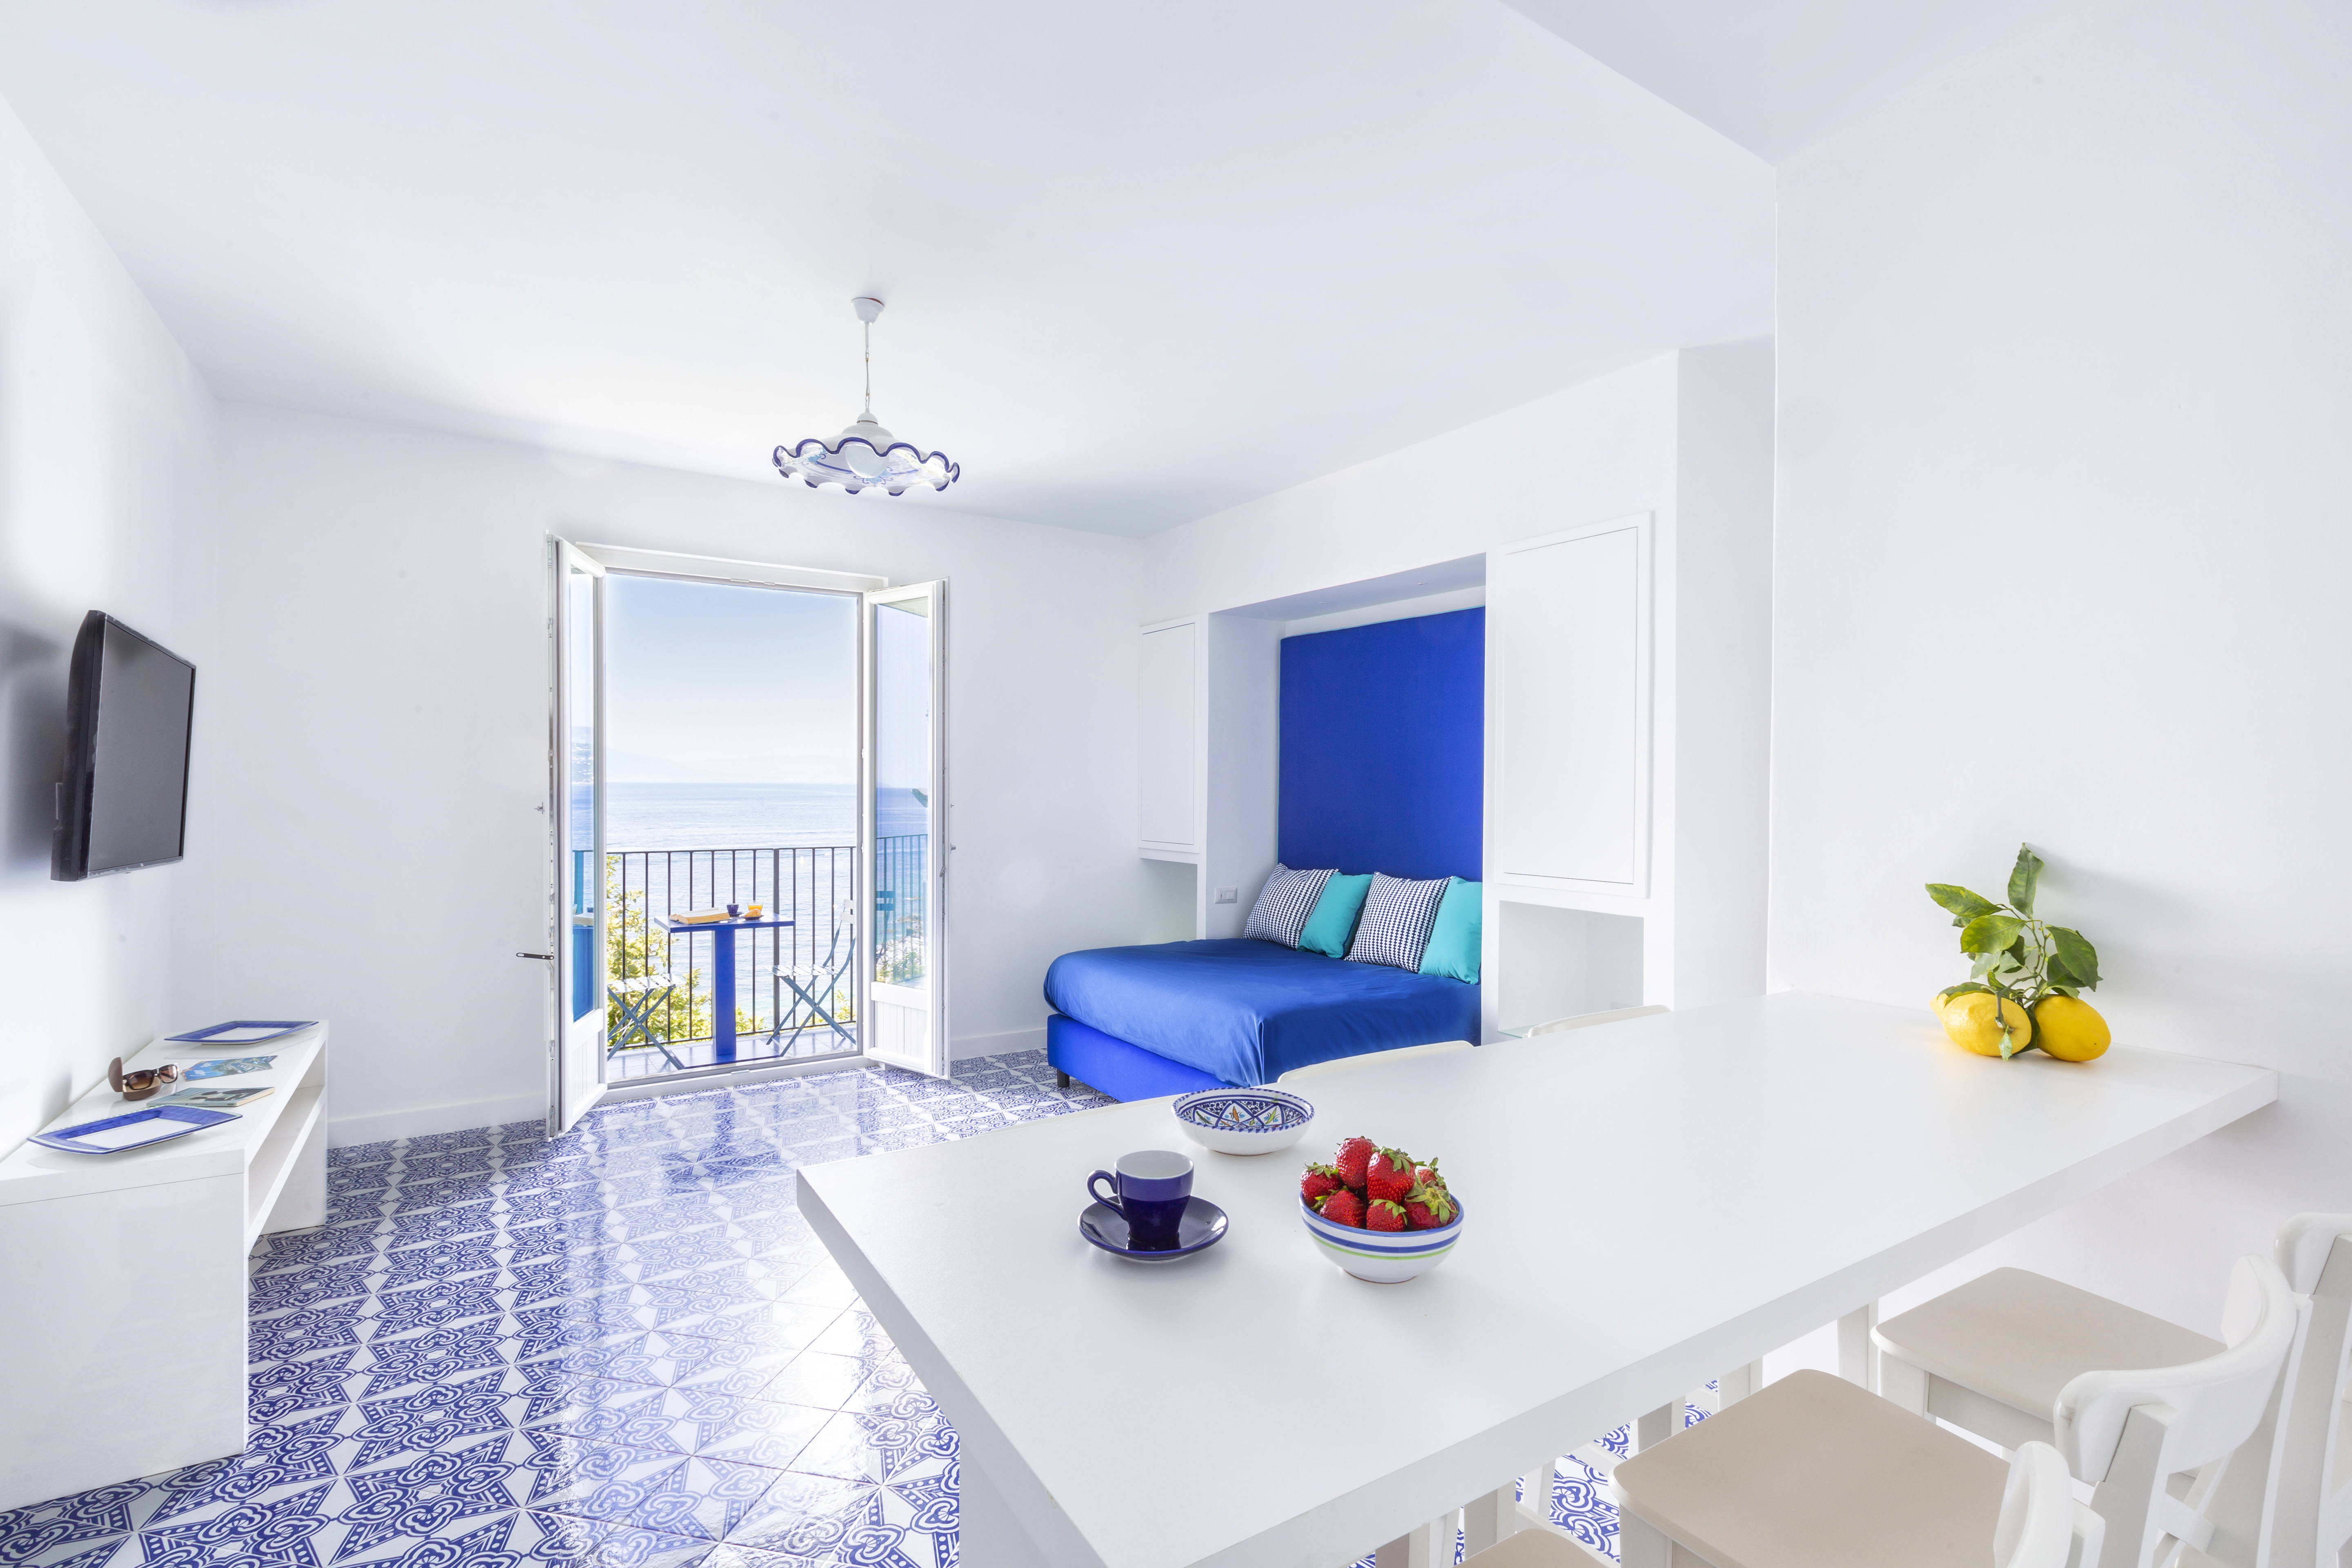 A white room with a blue murphy bed and blue tiled floor and a white high top table with seating.